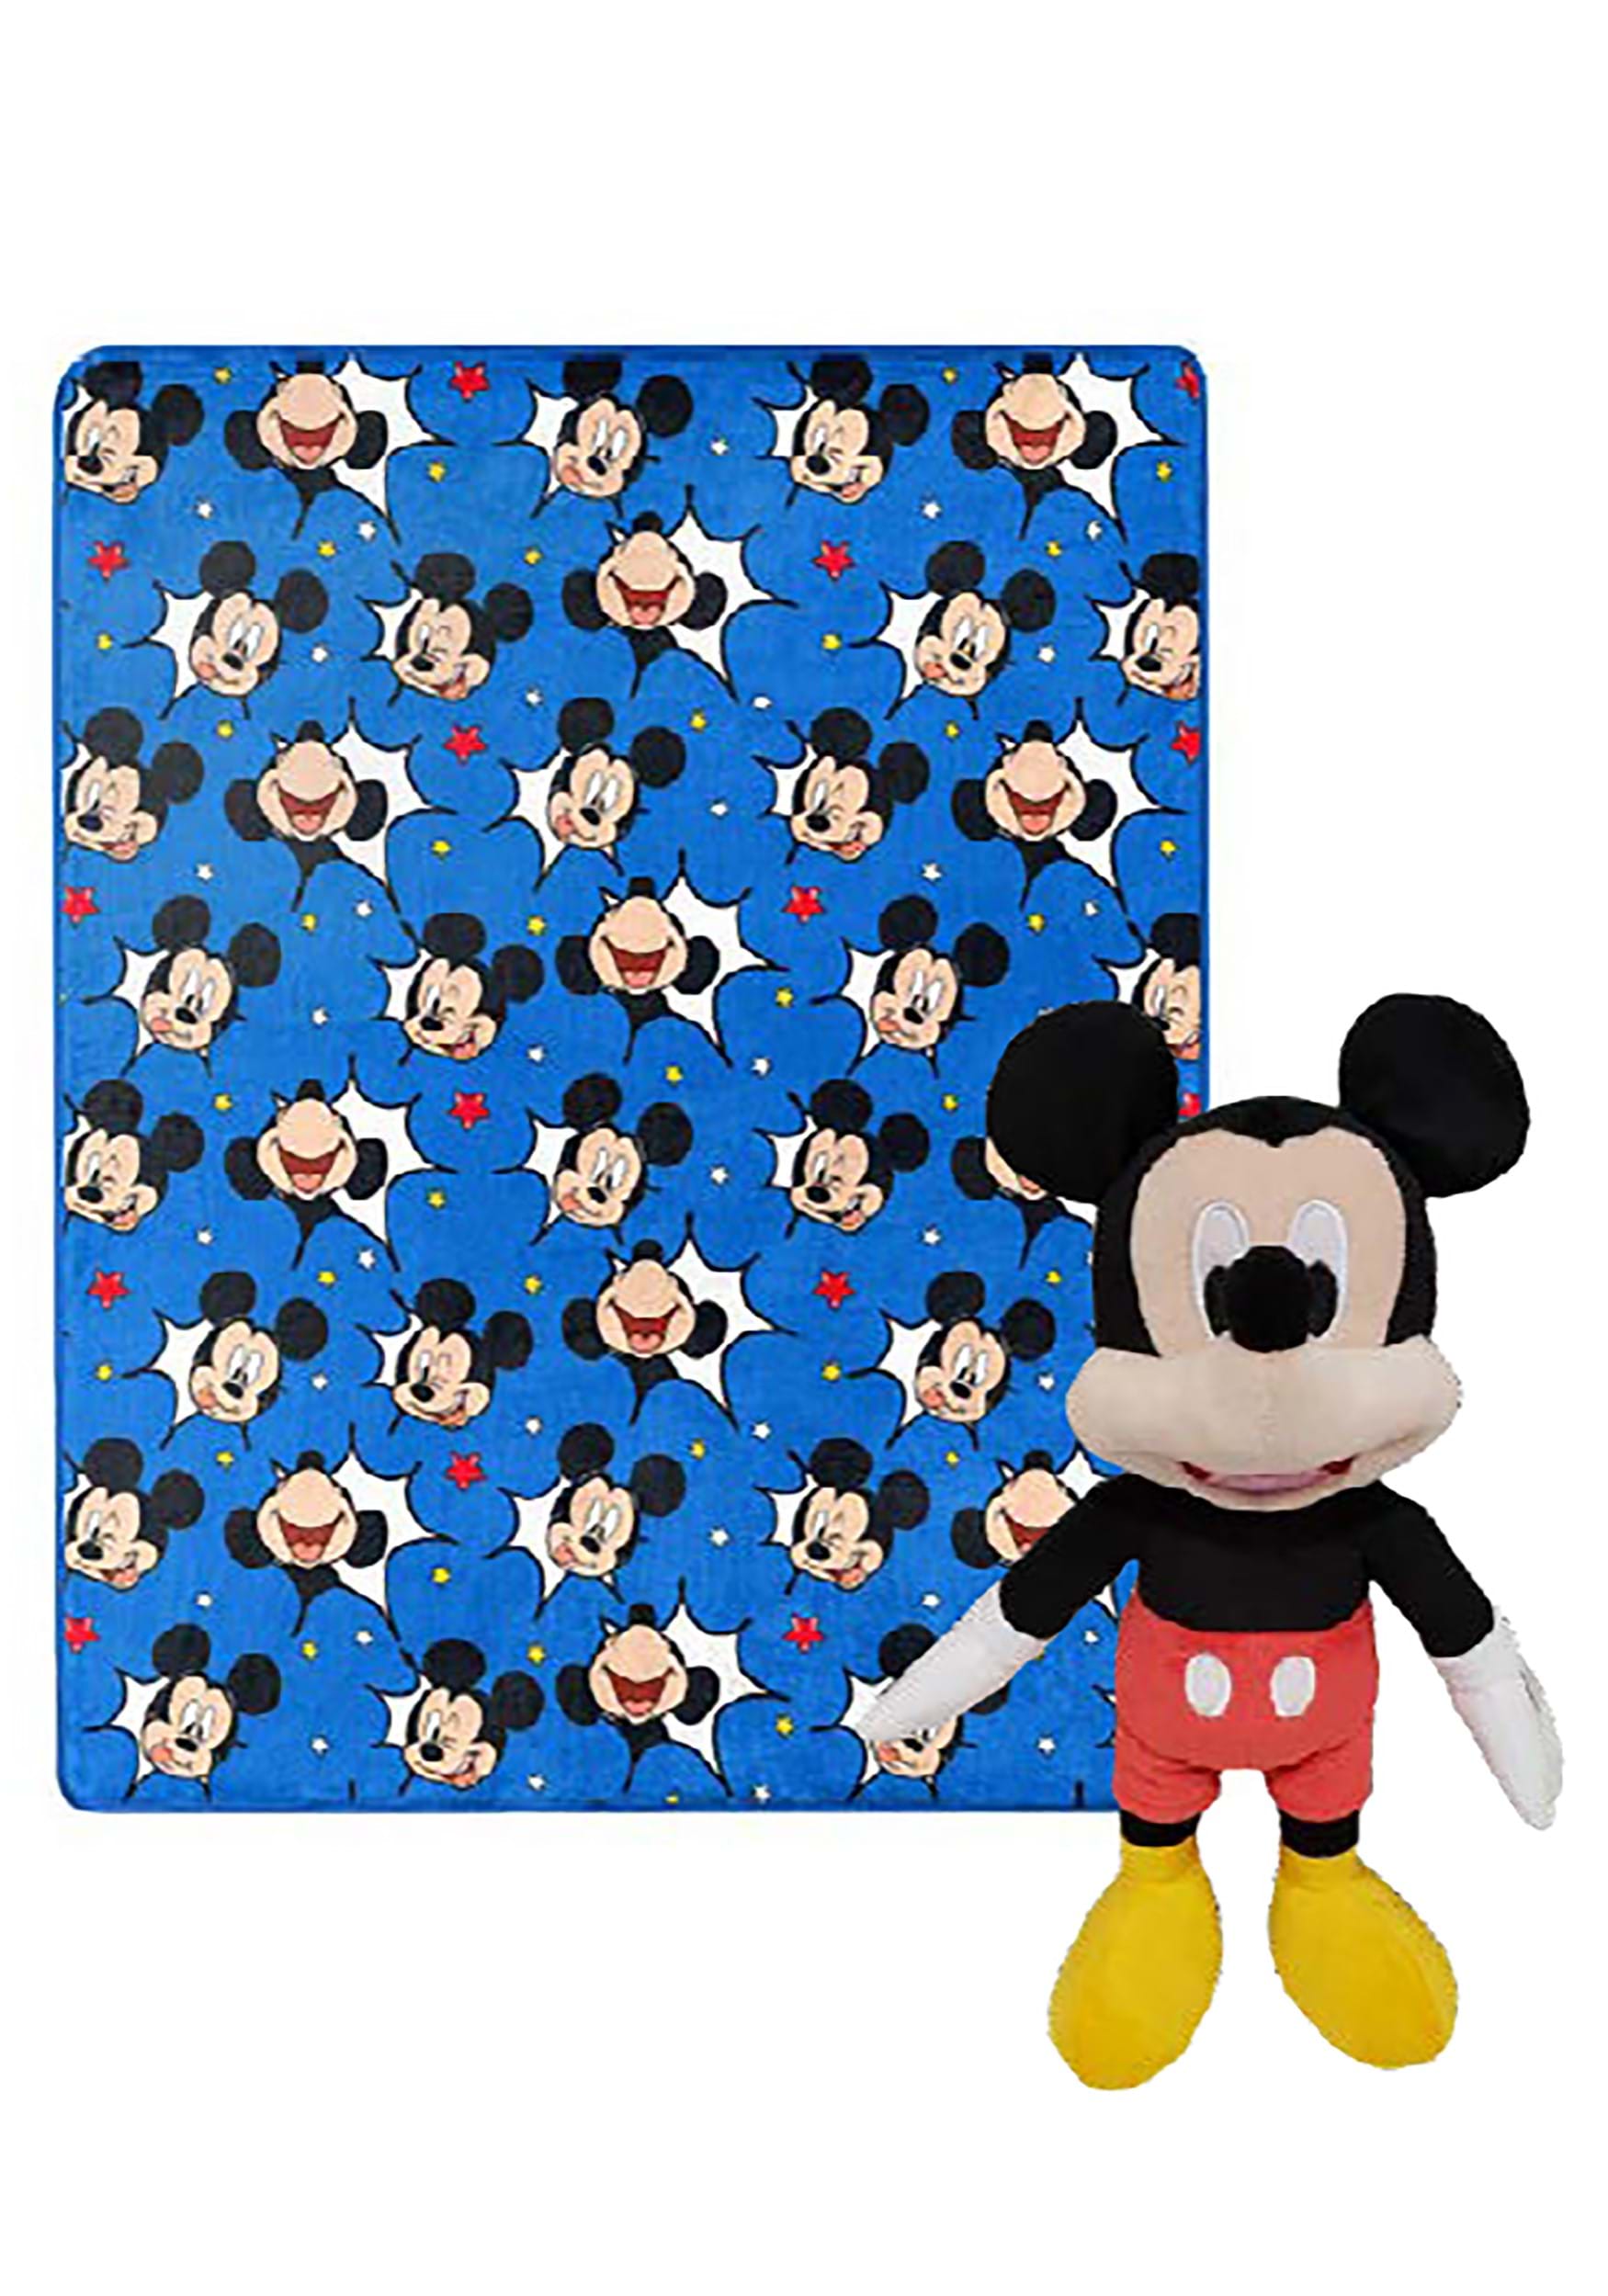 Disney Mickey Mouse Comic Pop Throw Blanket and Pillow Plush